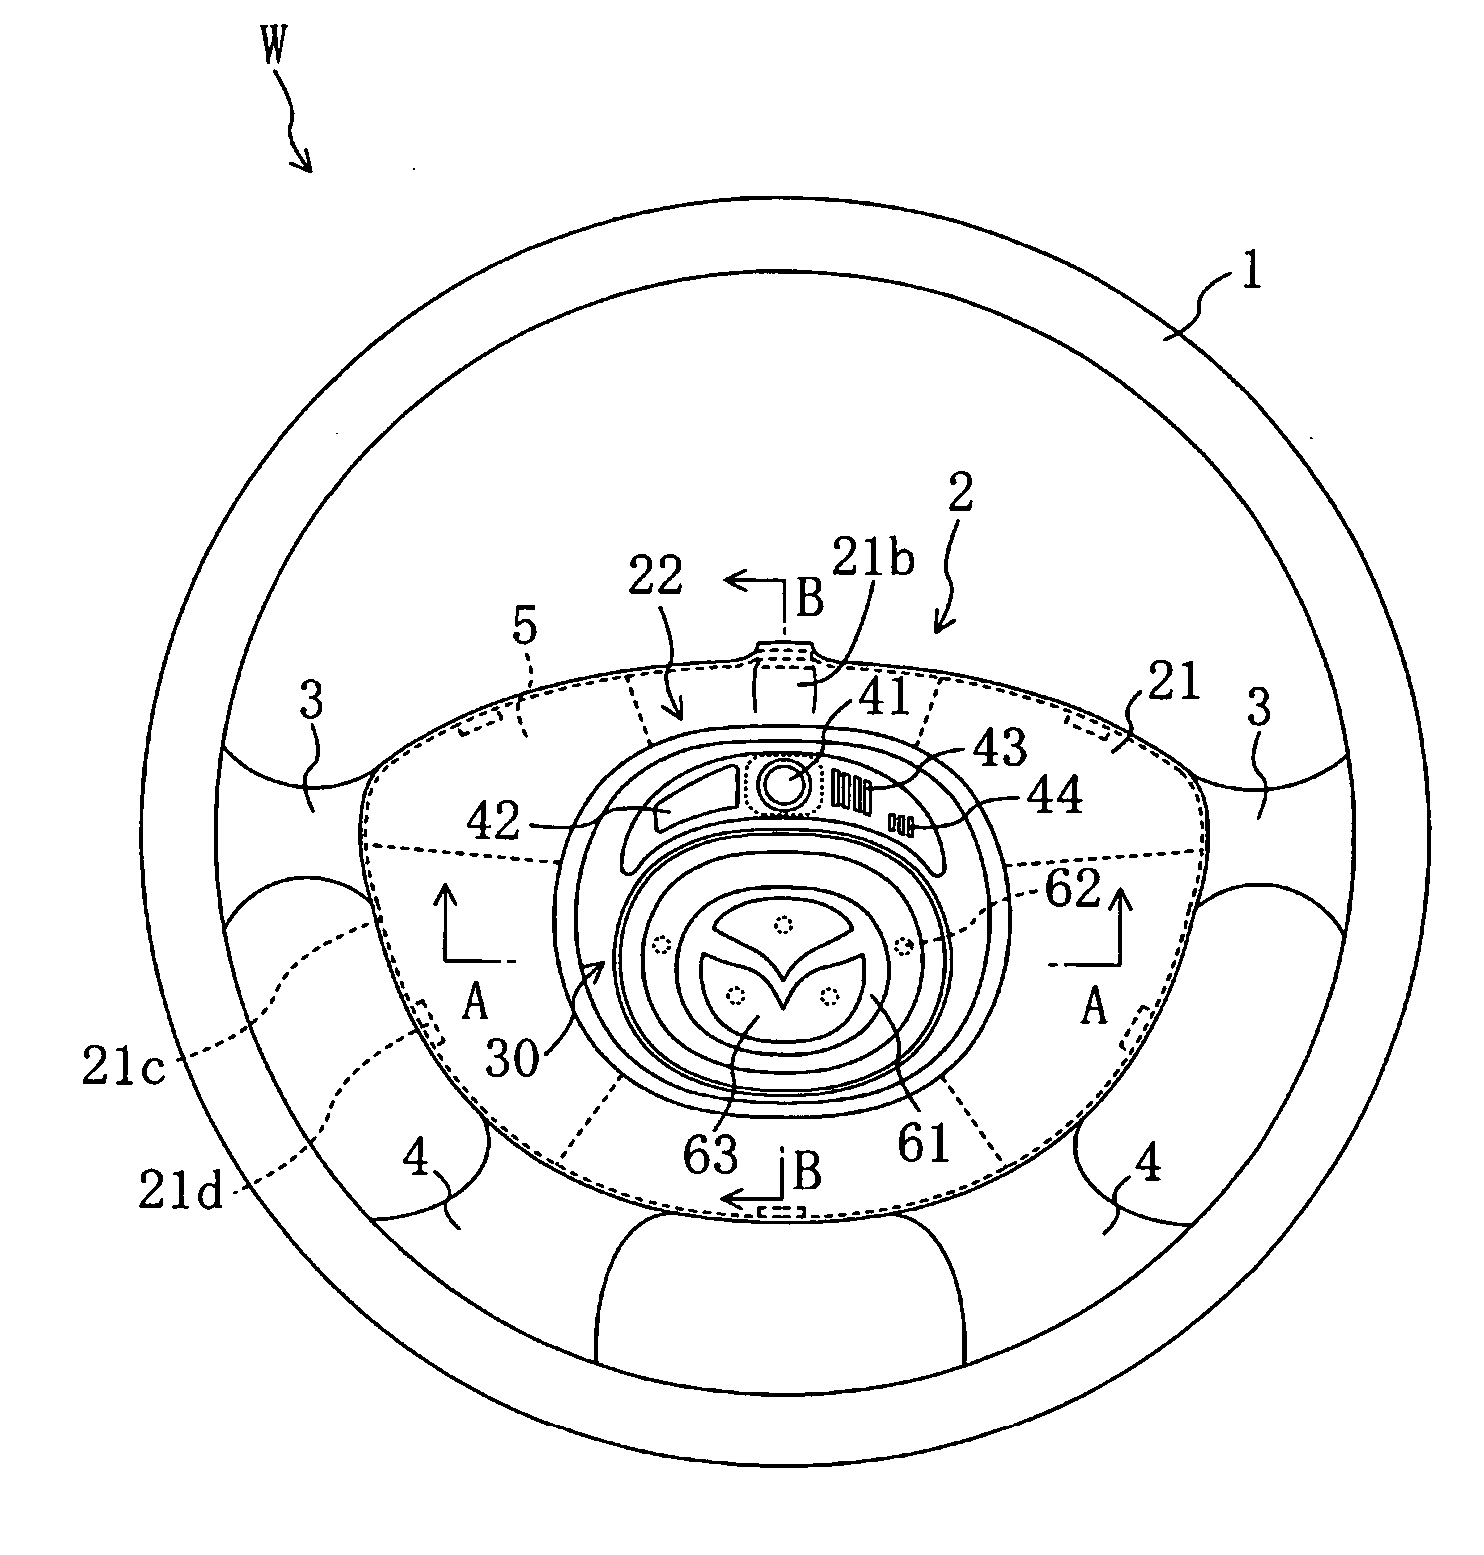 Steering wheel equipped with airbag device